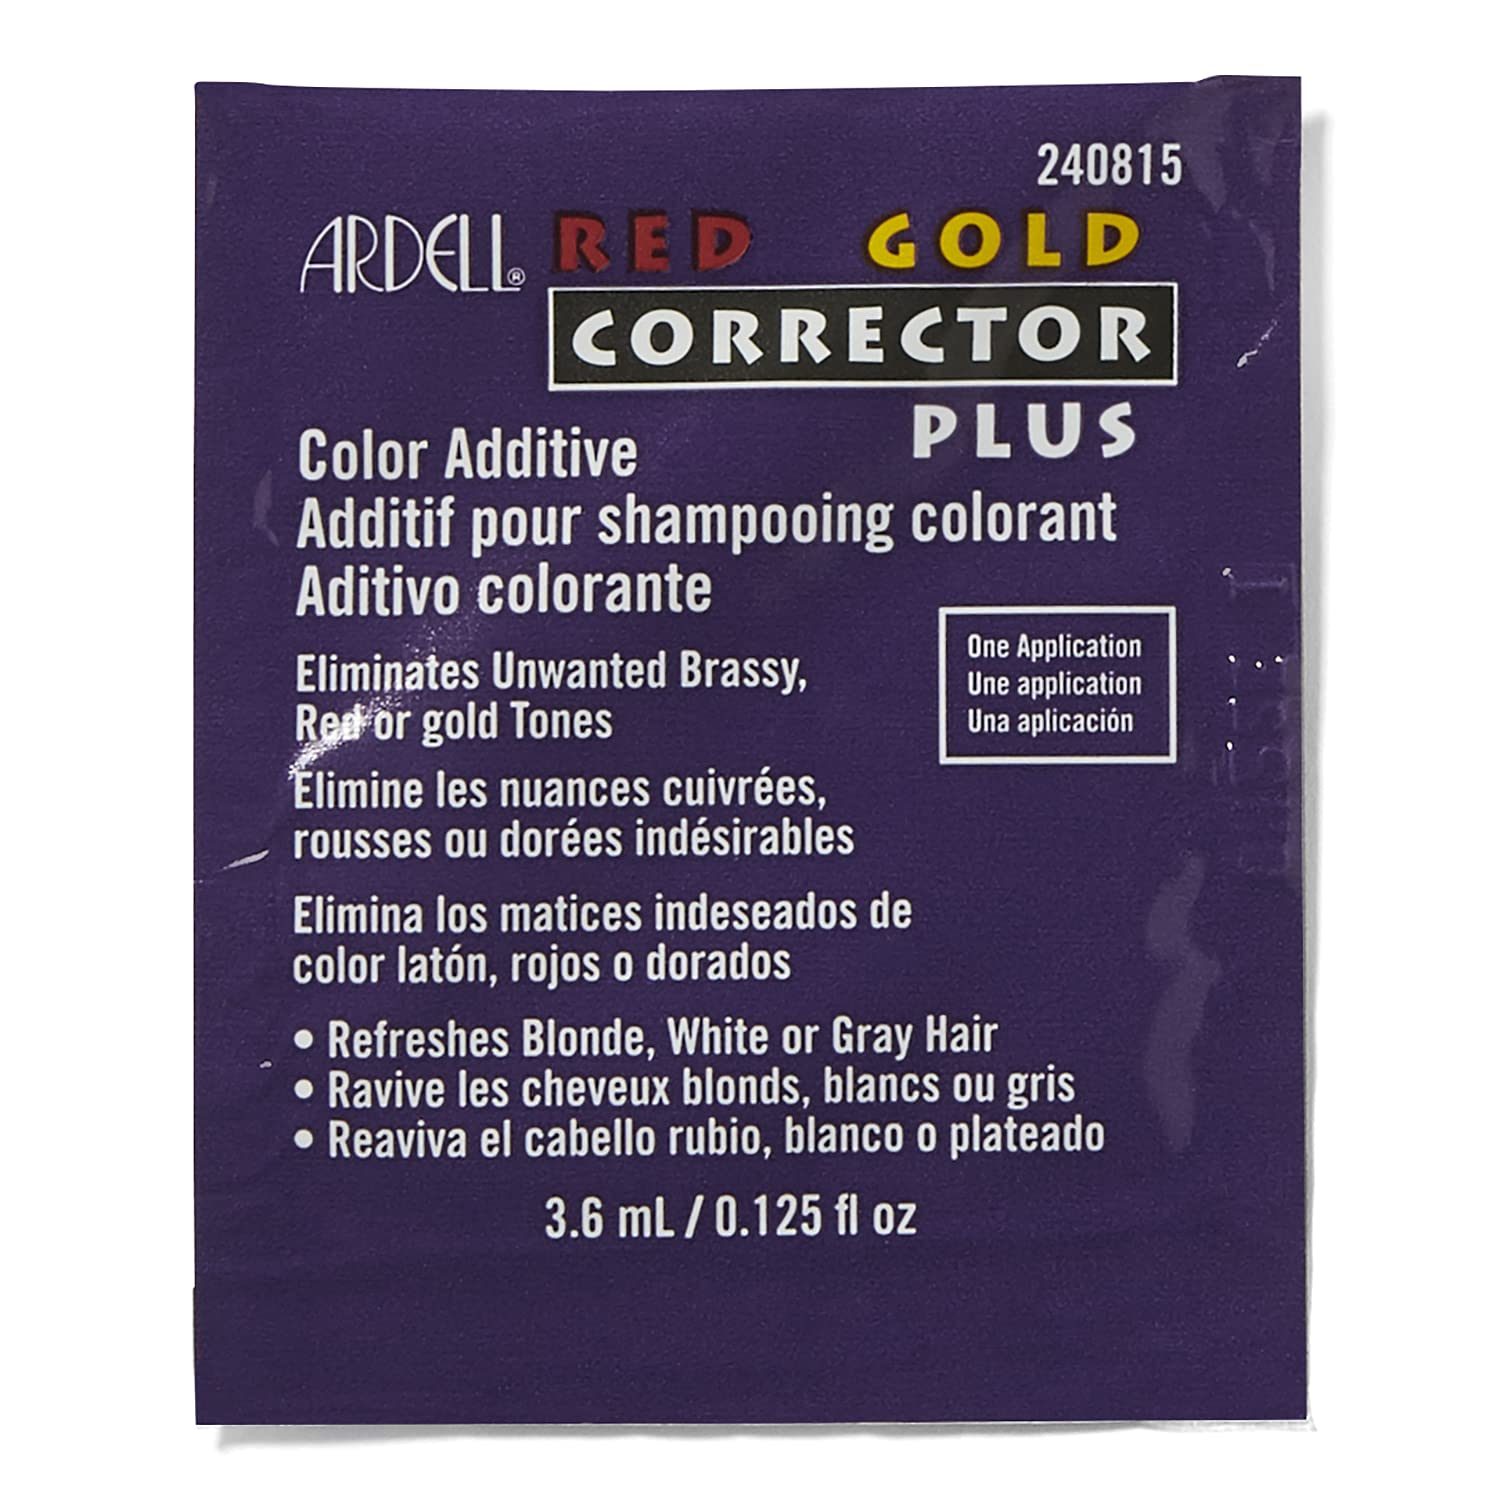 Red Gold Corrector Plus, 0.125 Fl Oz (Pack of 1)